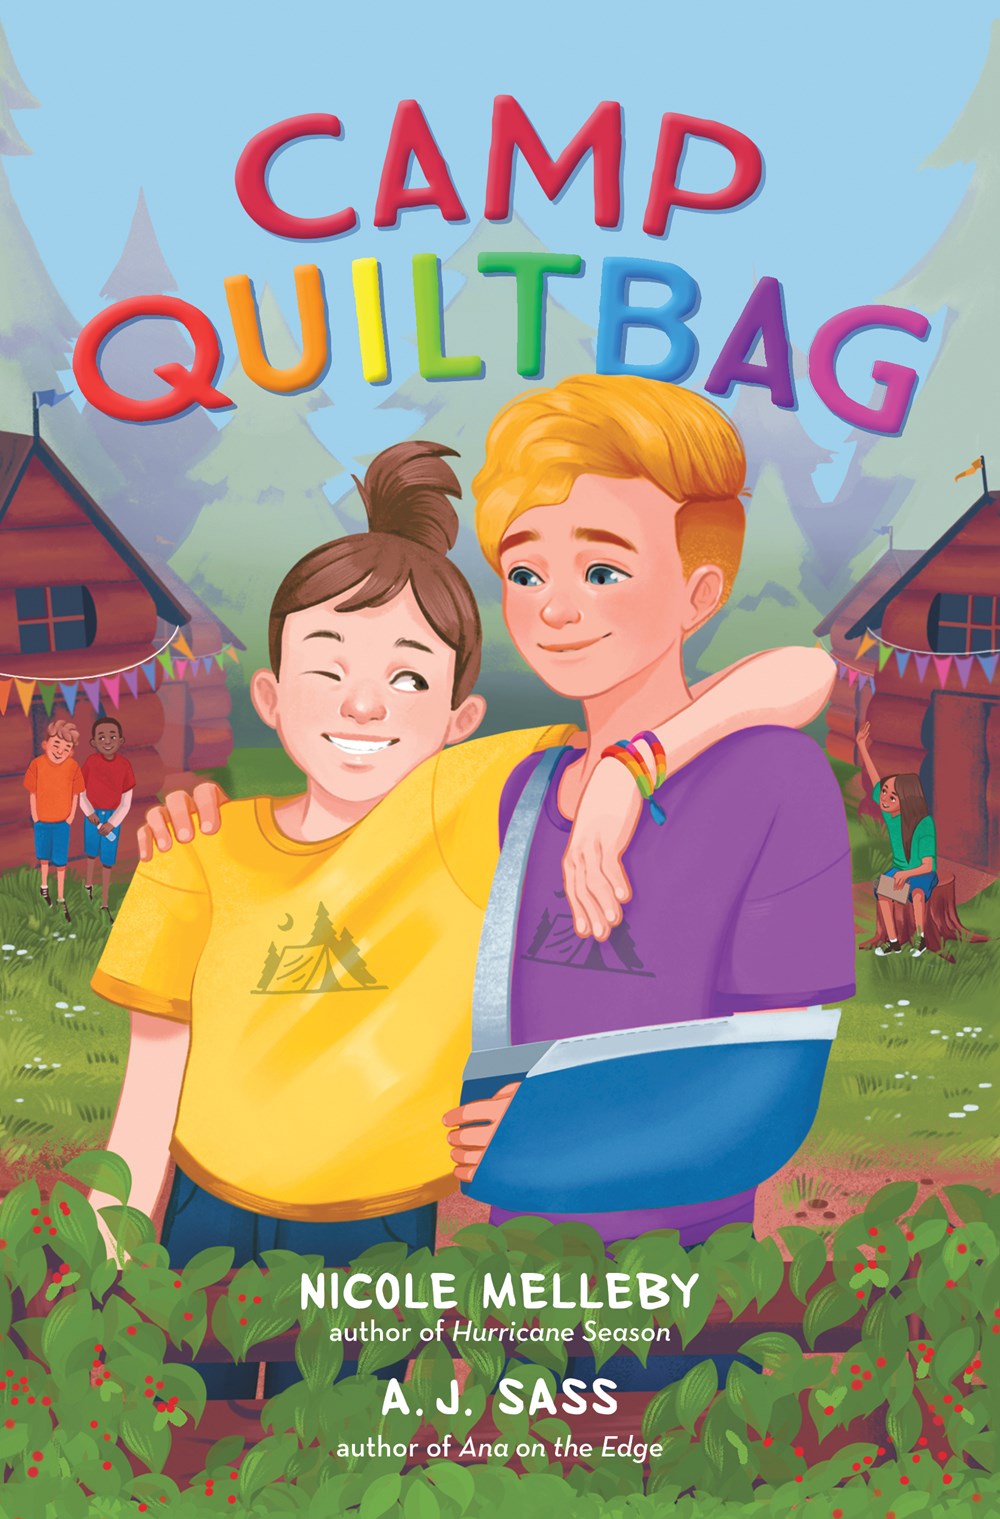 Camp QUILTBAG by Nicole Melleby, A. J. Sass